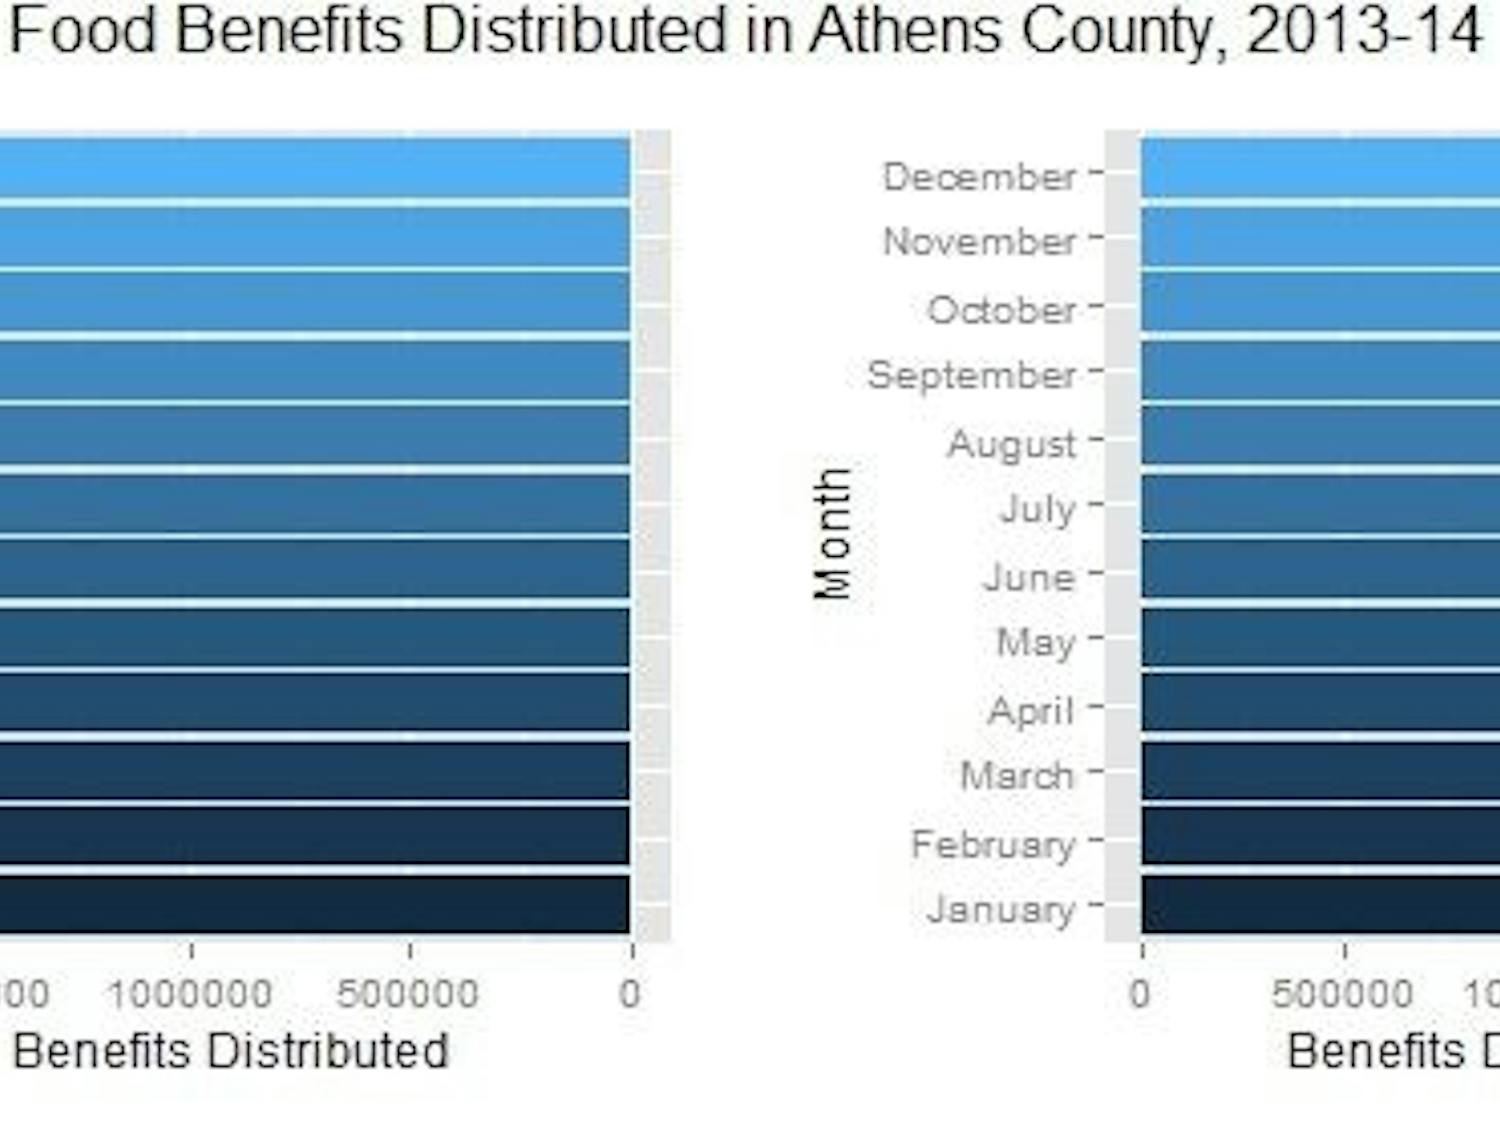 Food benefits distributed in Athens County, 2013-14  